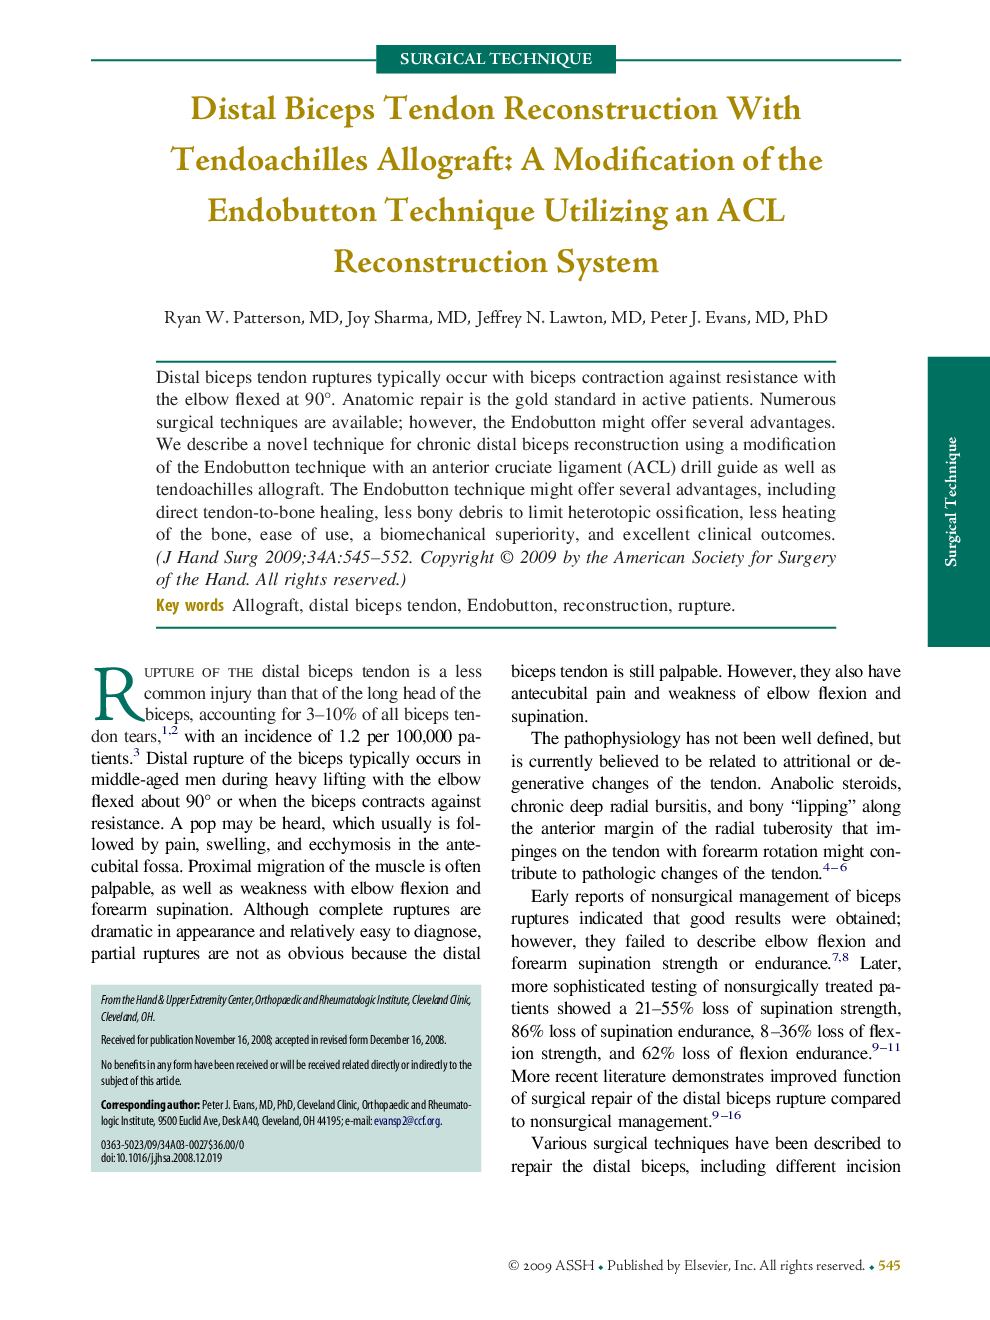 Distal Biceps Tendon Reconstruction With Tendoachilles Allograft: A Modification of the Endobutton Technique Utilizing an ACL Reconstruction System 